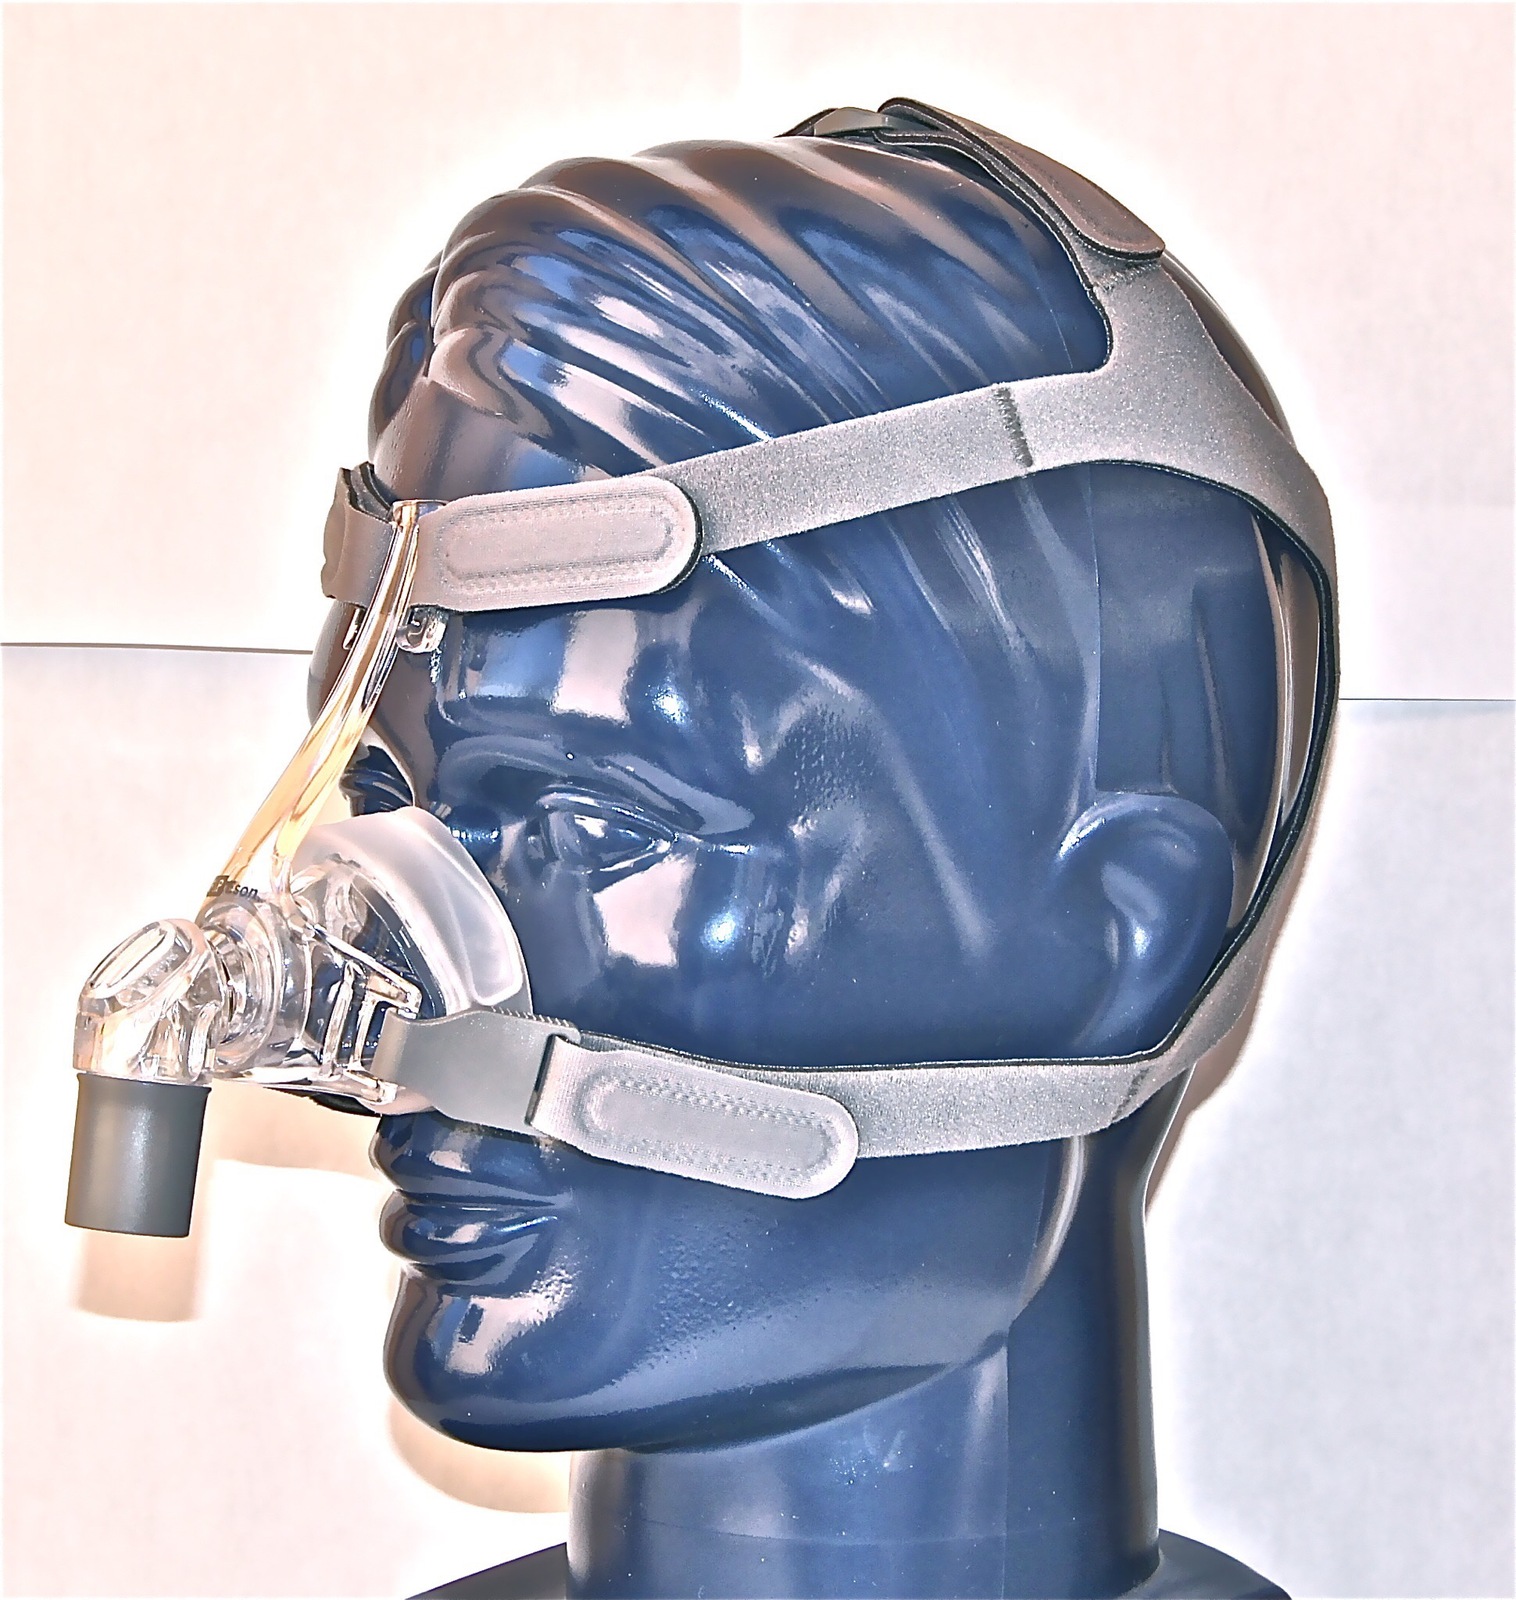 NEW Fisher & Paykel   ESON   NASAL CPAP Mask with Headgear SMALL - $69.00